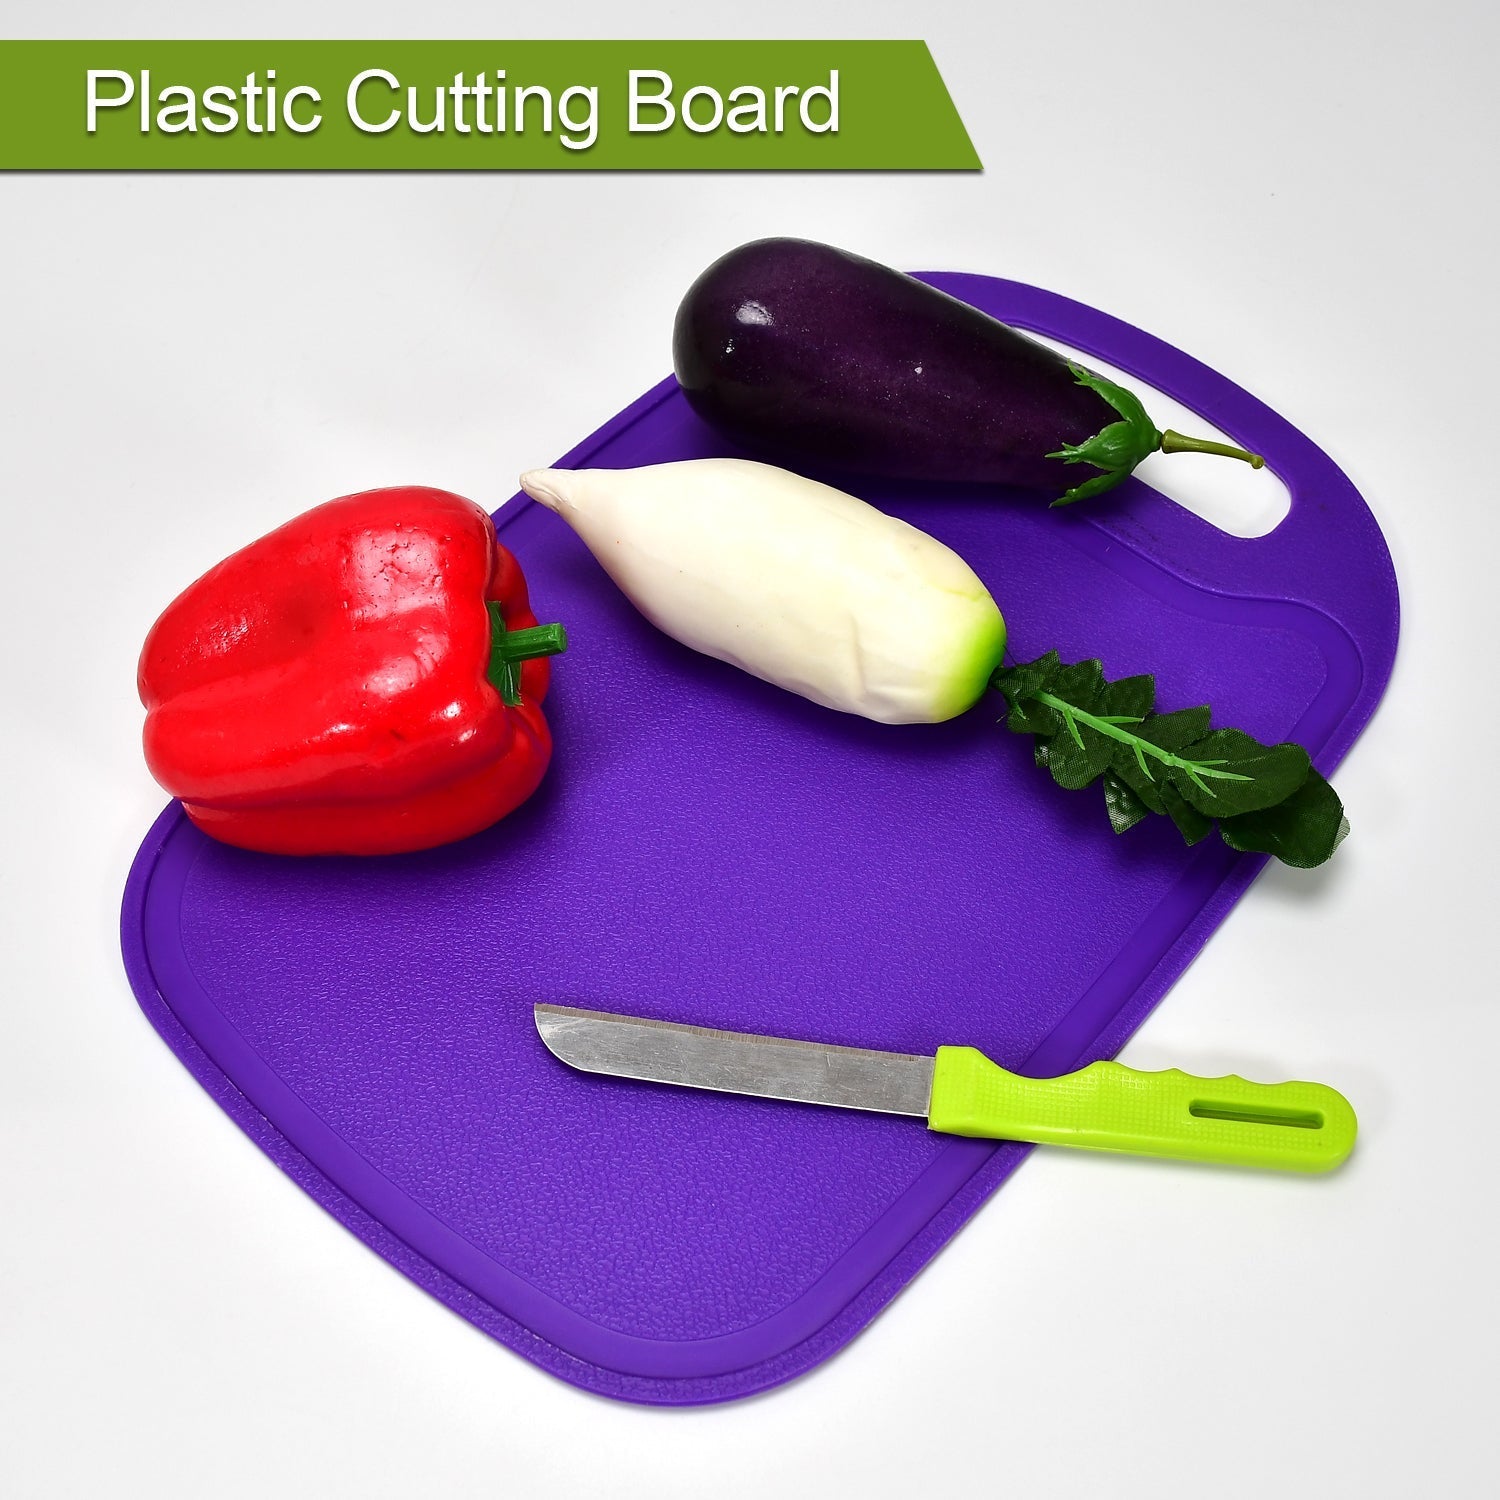 2477 Vegetables and Fruits Cutting Chopping Board Plastic Chopper Cutter Board Non-slip Antibacterial Surface with Extra Thickness DeoDap